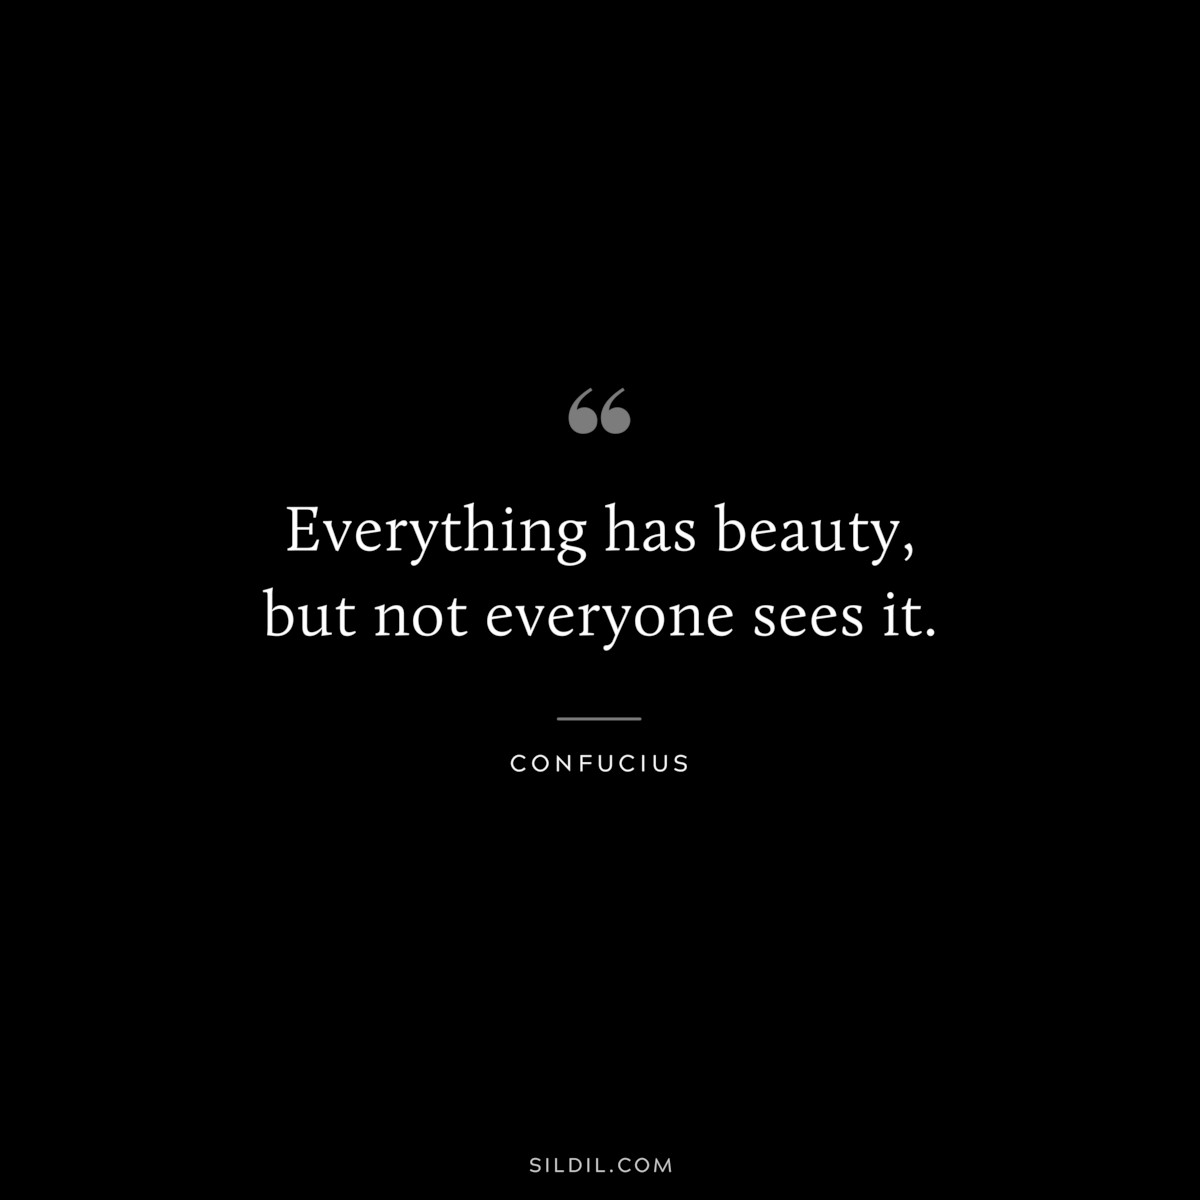 Everything has beauty, but not everyone sees it. ― Confucius